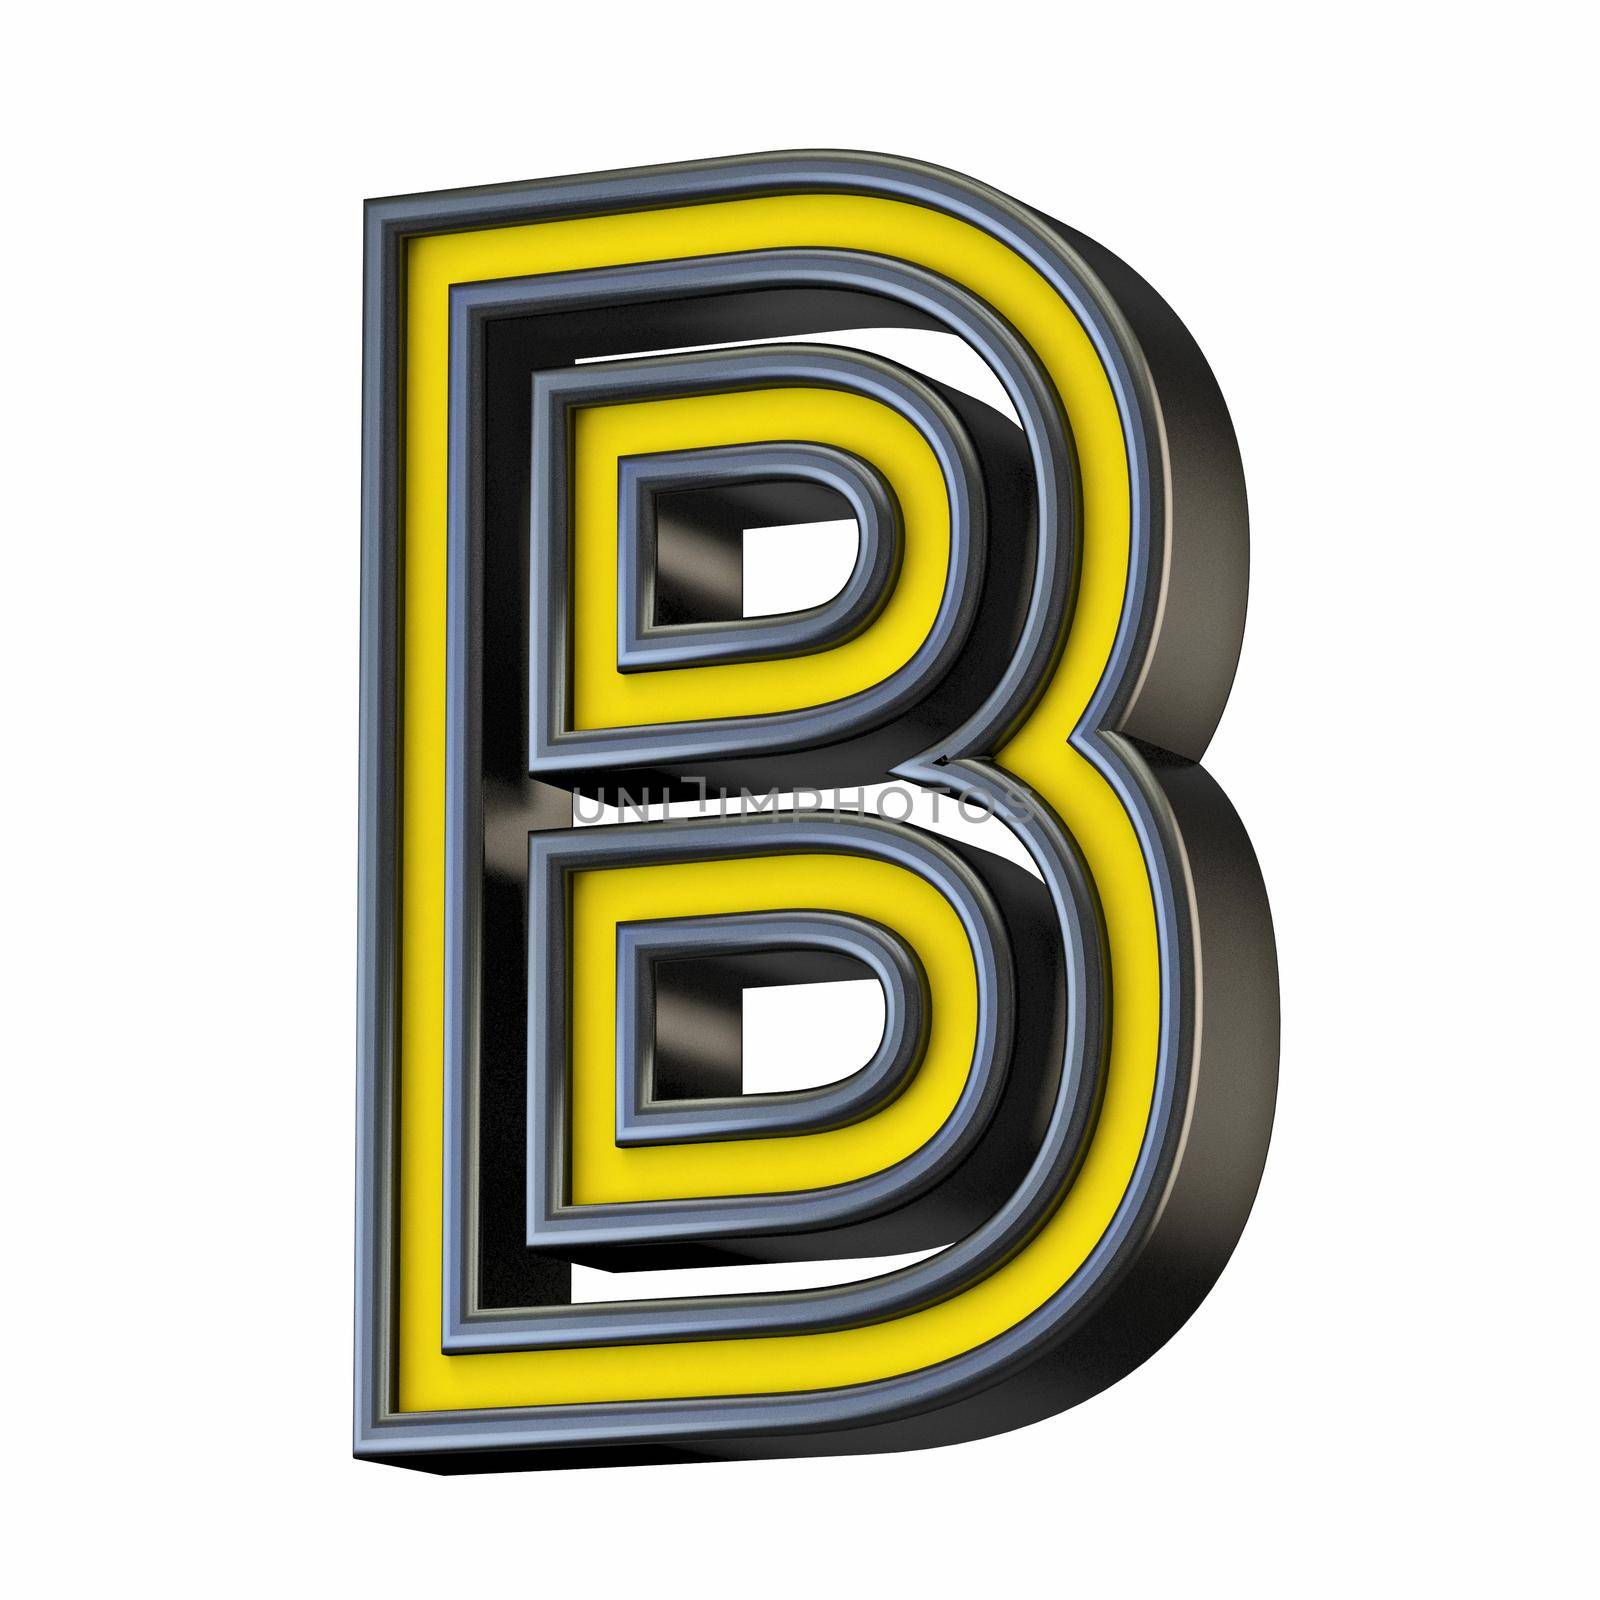 Yellow black outlined font Letter B 3D rendering illustration isolated on white background